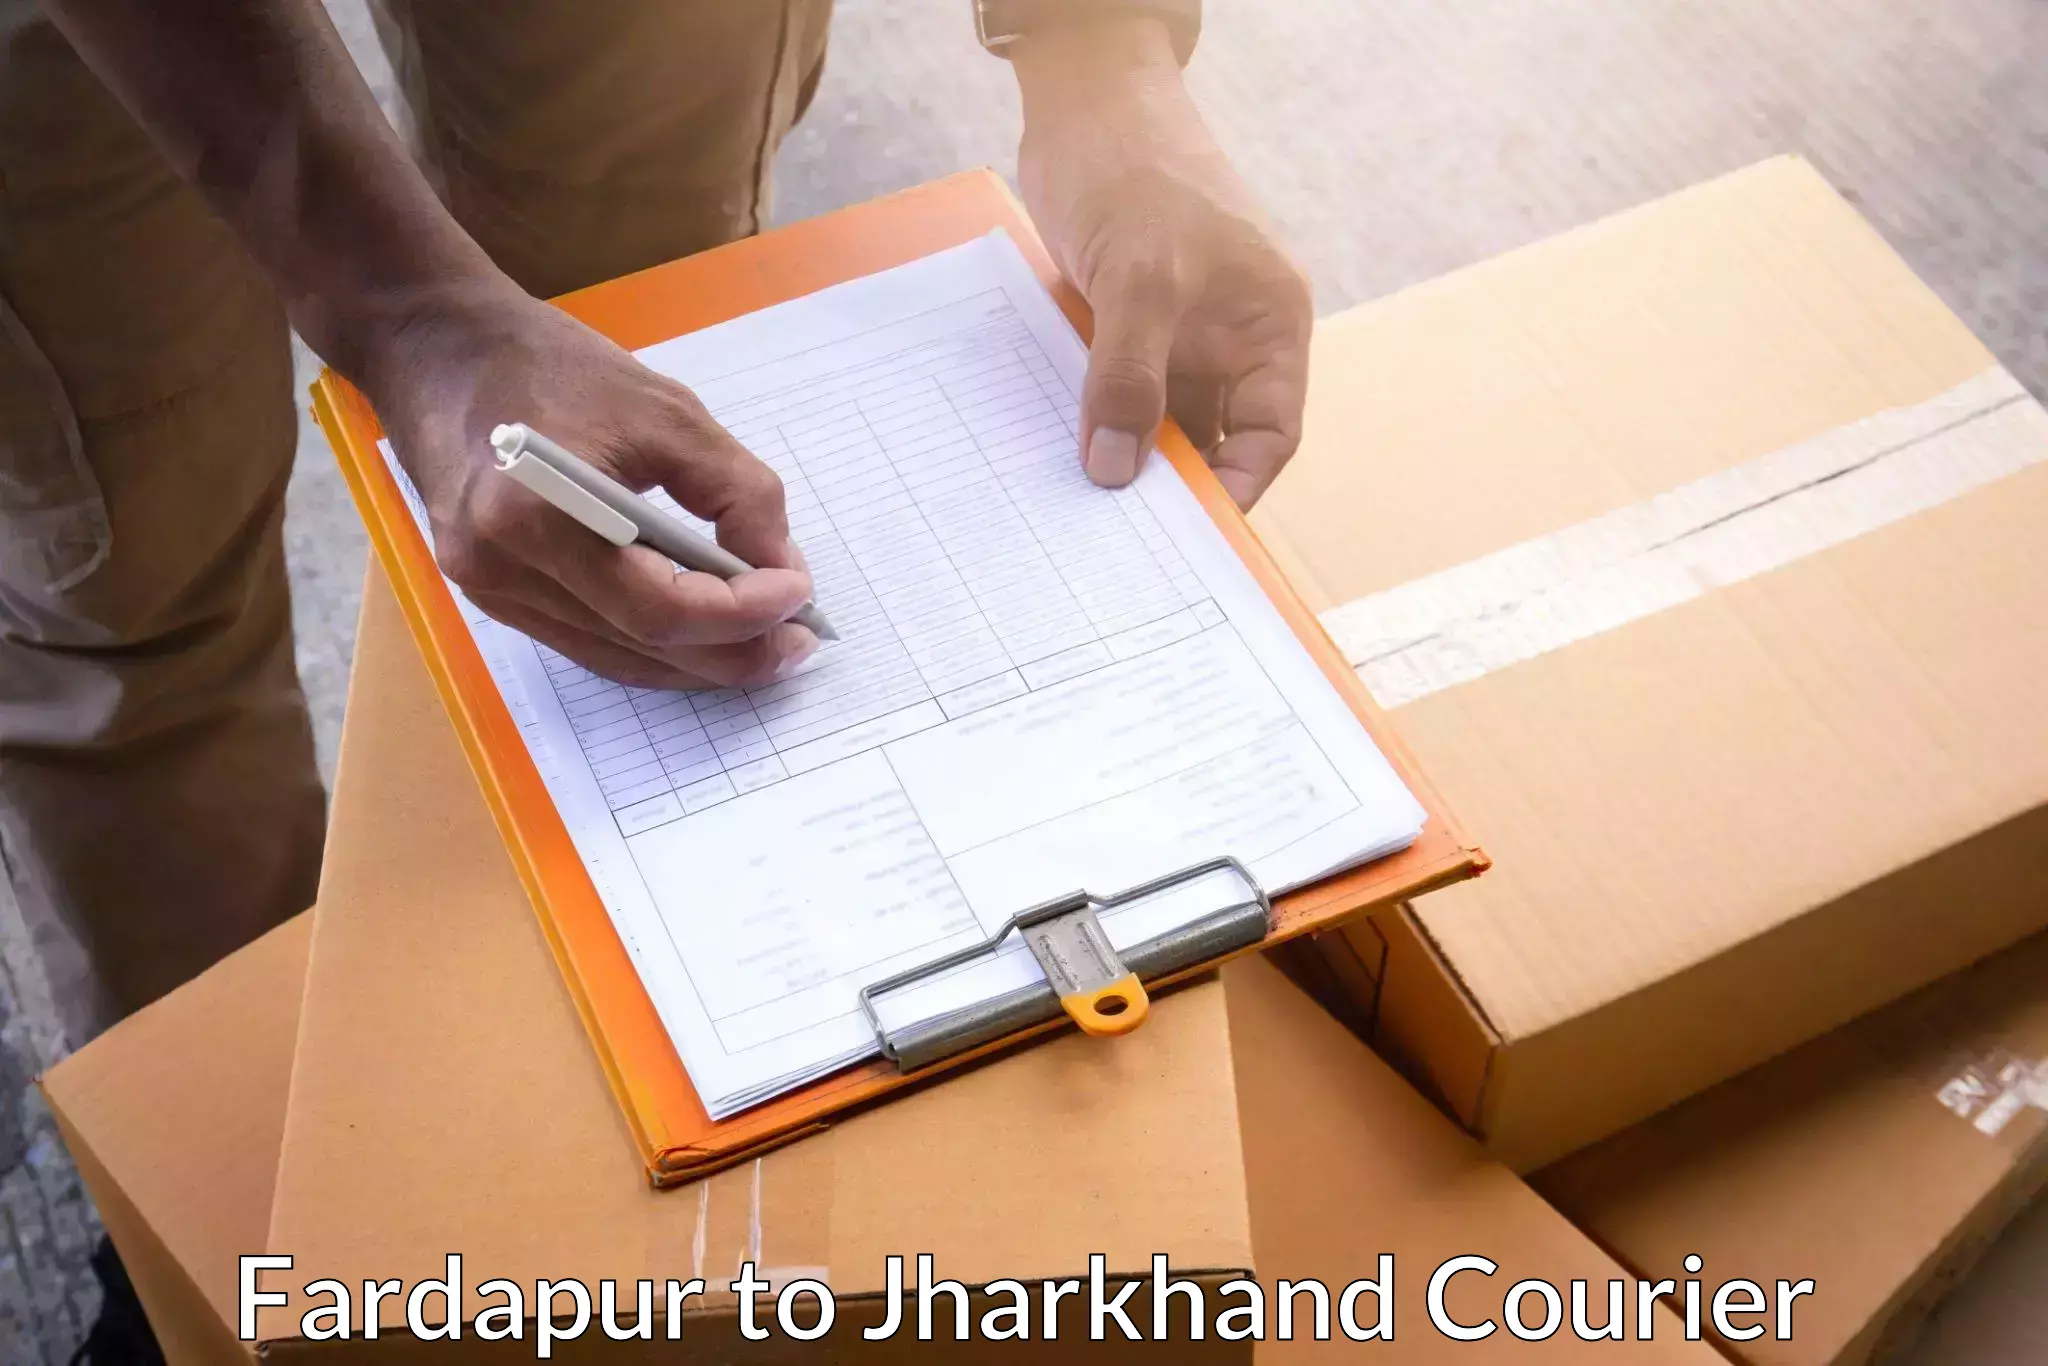 Courier service efficiency Fardapur to Koderma